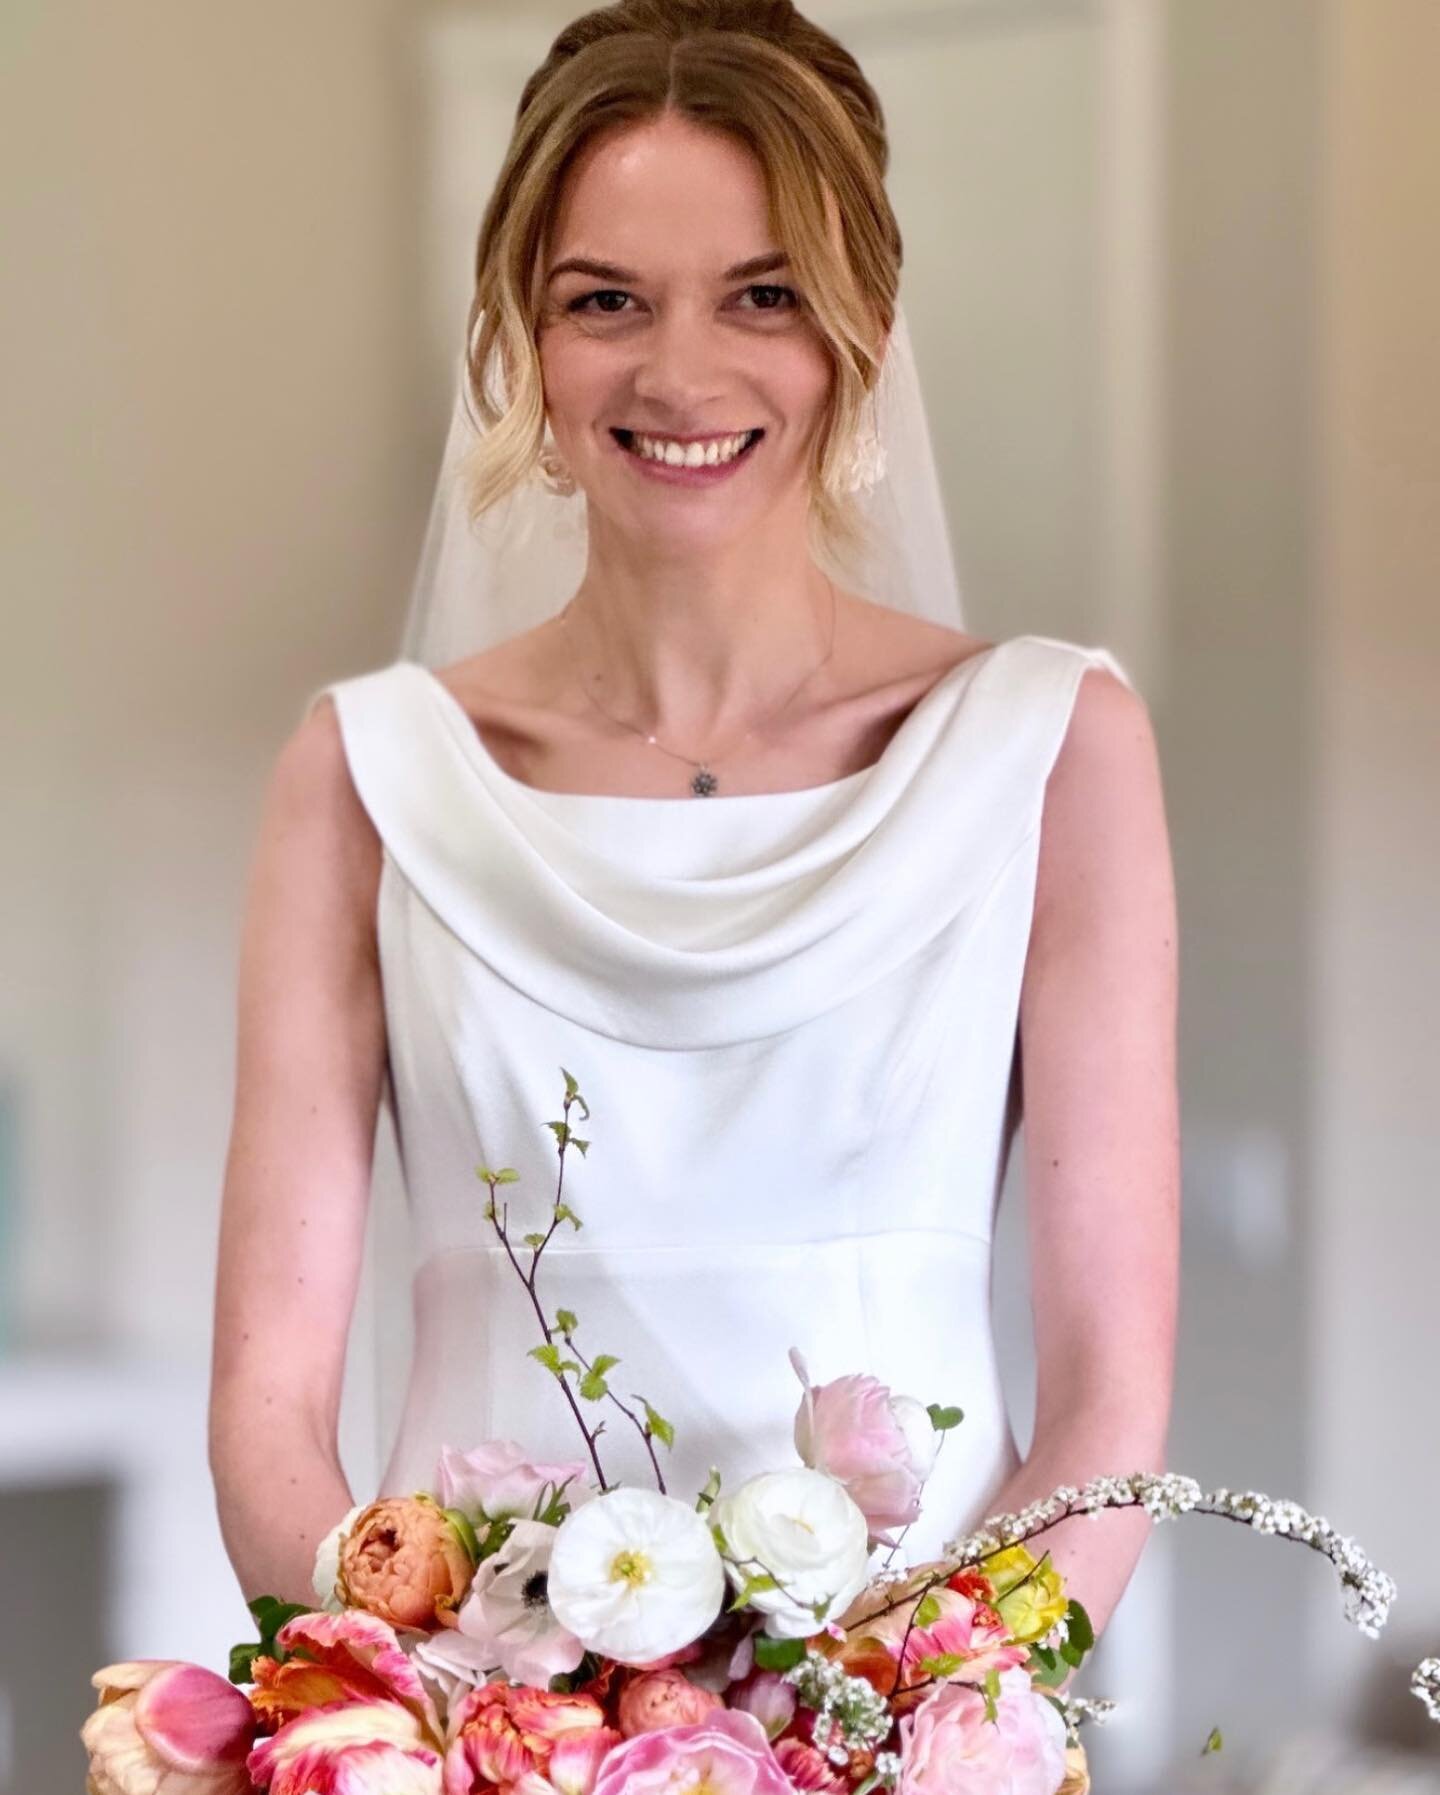 Elly✨

Elly chose a polished, detailed low bun to compliment her elegant, minimalist bridal look👌🏼
A glowy, pared-back makeup by @kellydaunmakeup perfectly enhanced her naturally pretty features and the bouquet by @coohillstudio had us all swooning